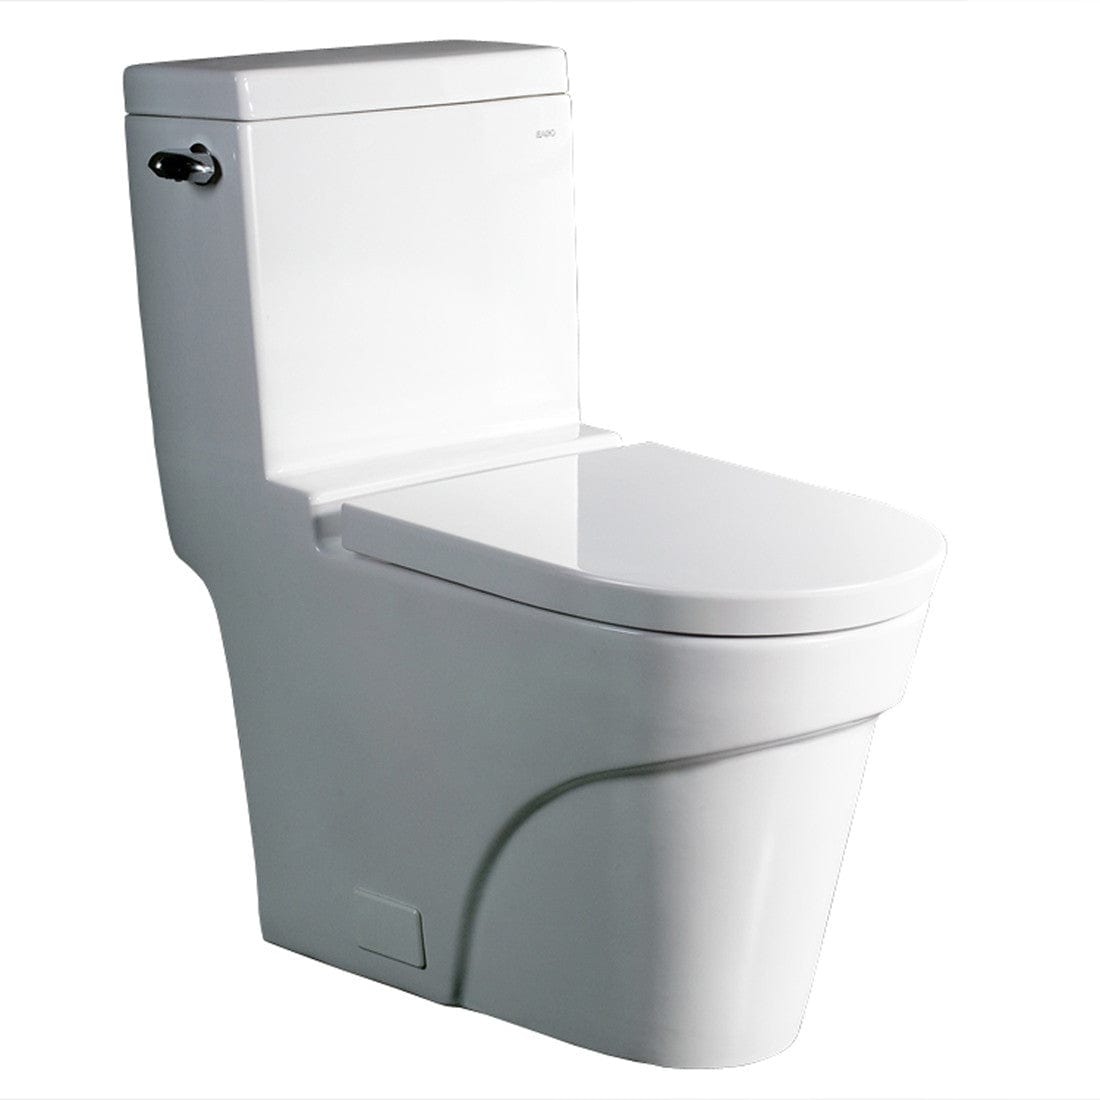 Meet The Oceanus, a TB326M Contemporary European Toilet from the Ariel Platinum series. This one-piece toilet design is cutting-edge and unique. The bowl is elongated and the seat is non-slamming and closes softly.